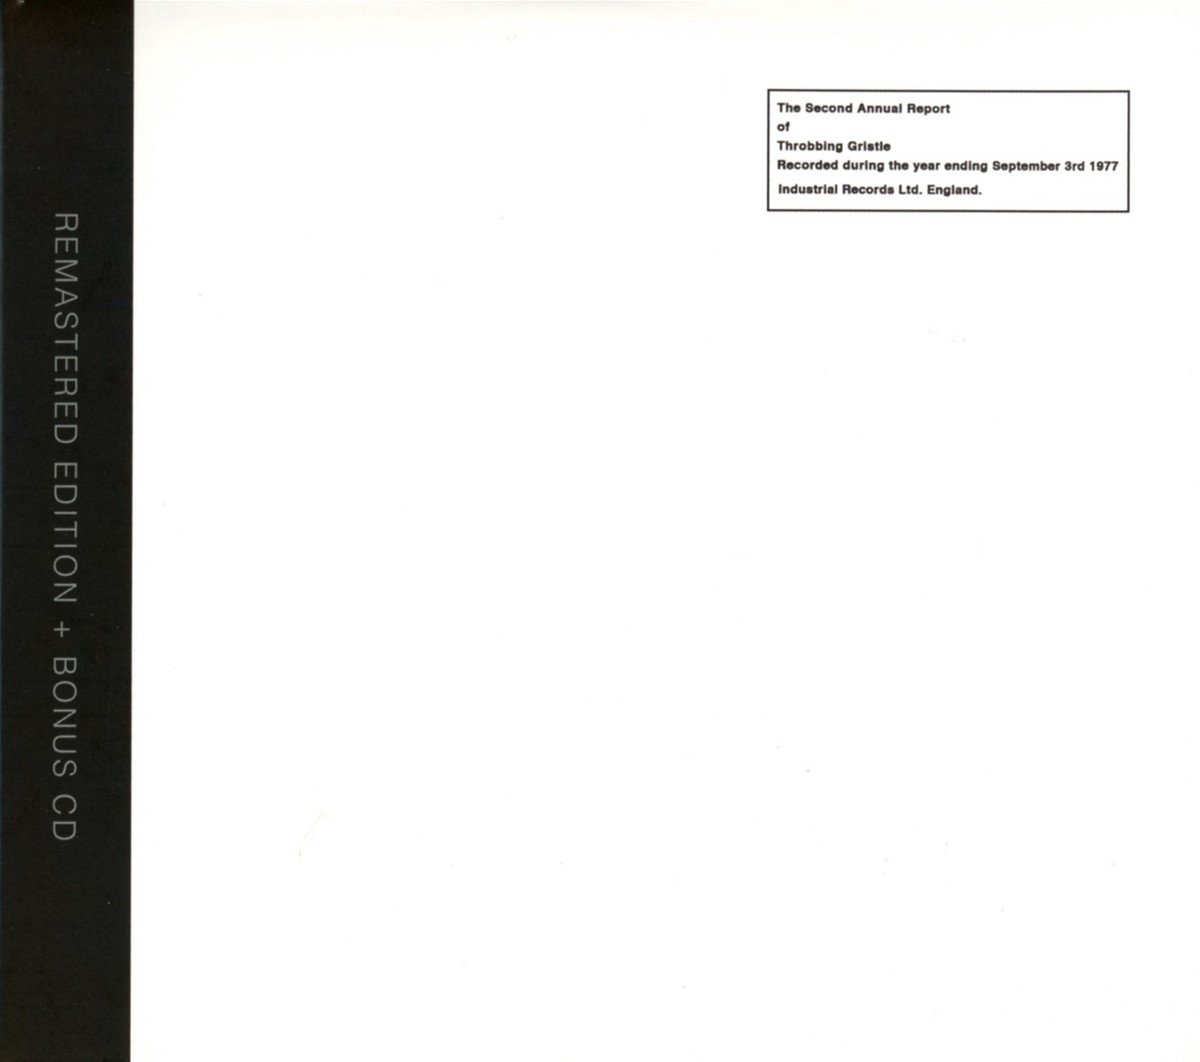 The Second Annual Report of Throbbing Gristle - 2 CD | Throbbing Gristle